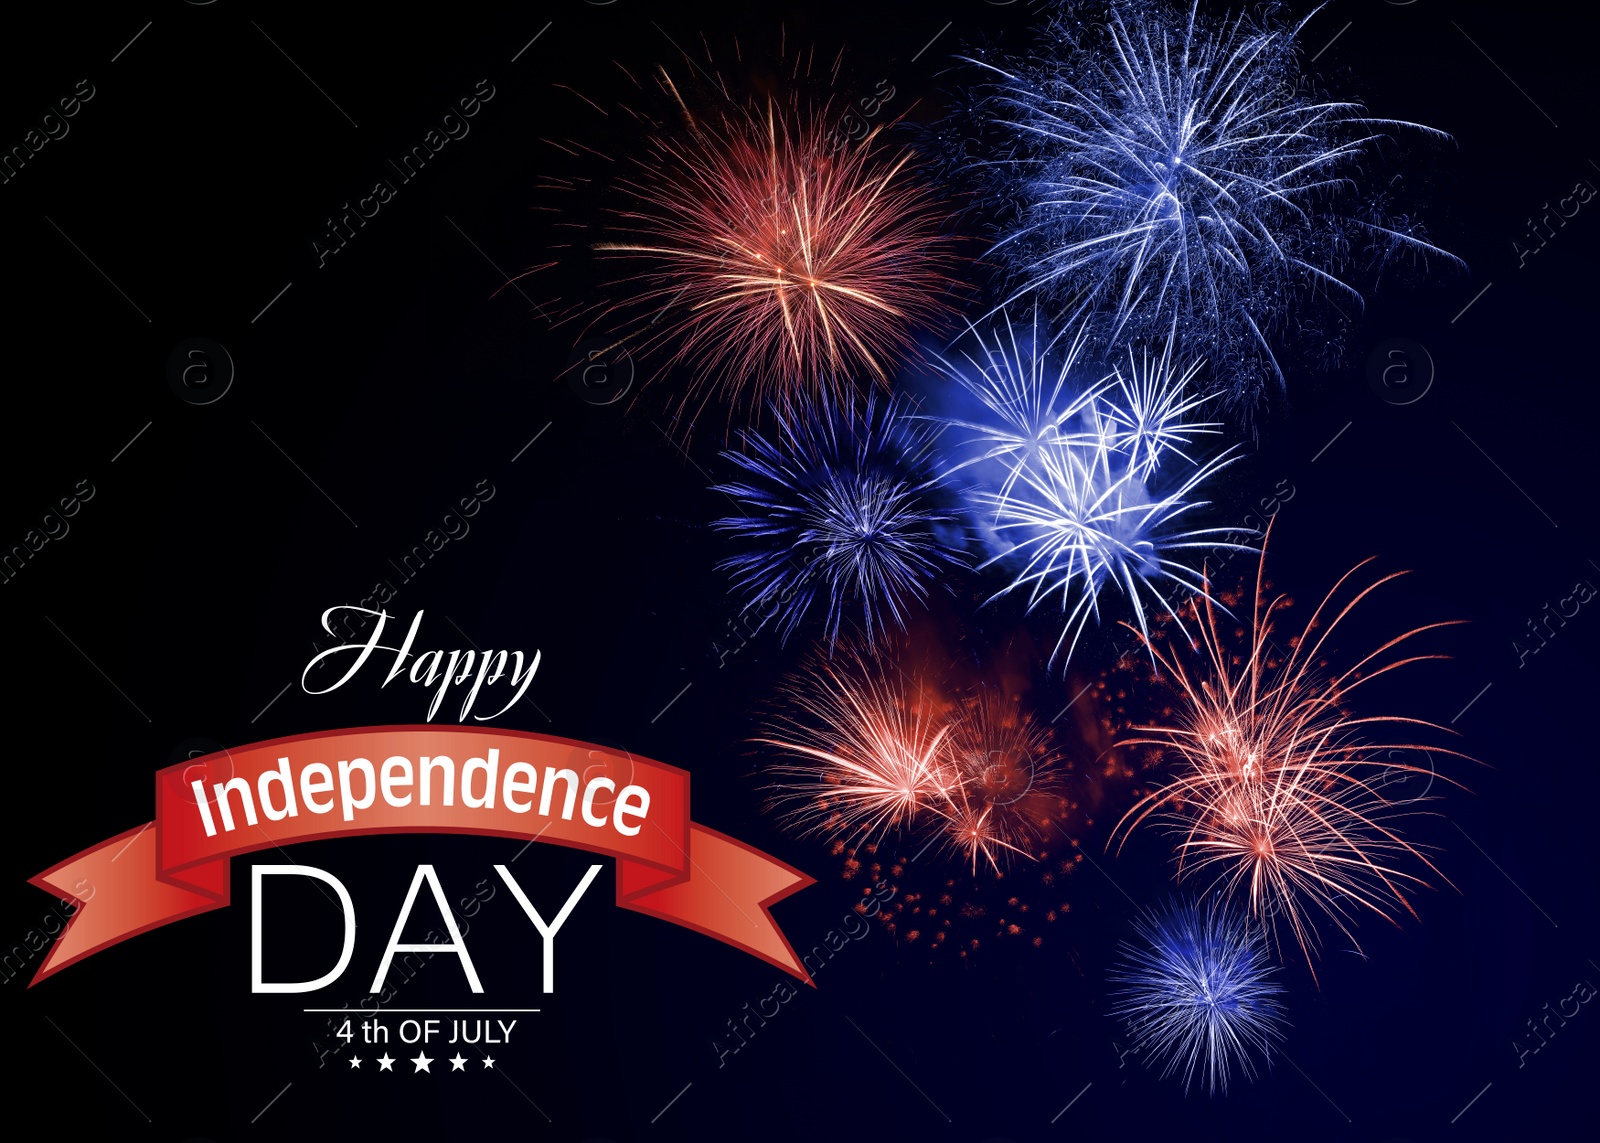 Image of 4th of July - Independence Day of USA. Beautiful bright fireworks lighting up night sky